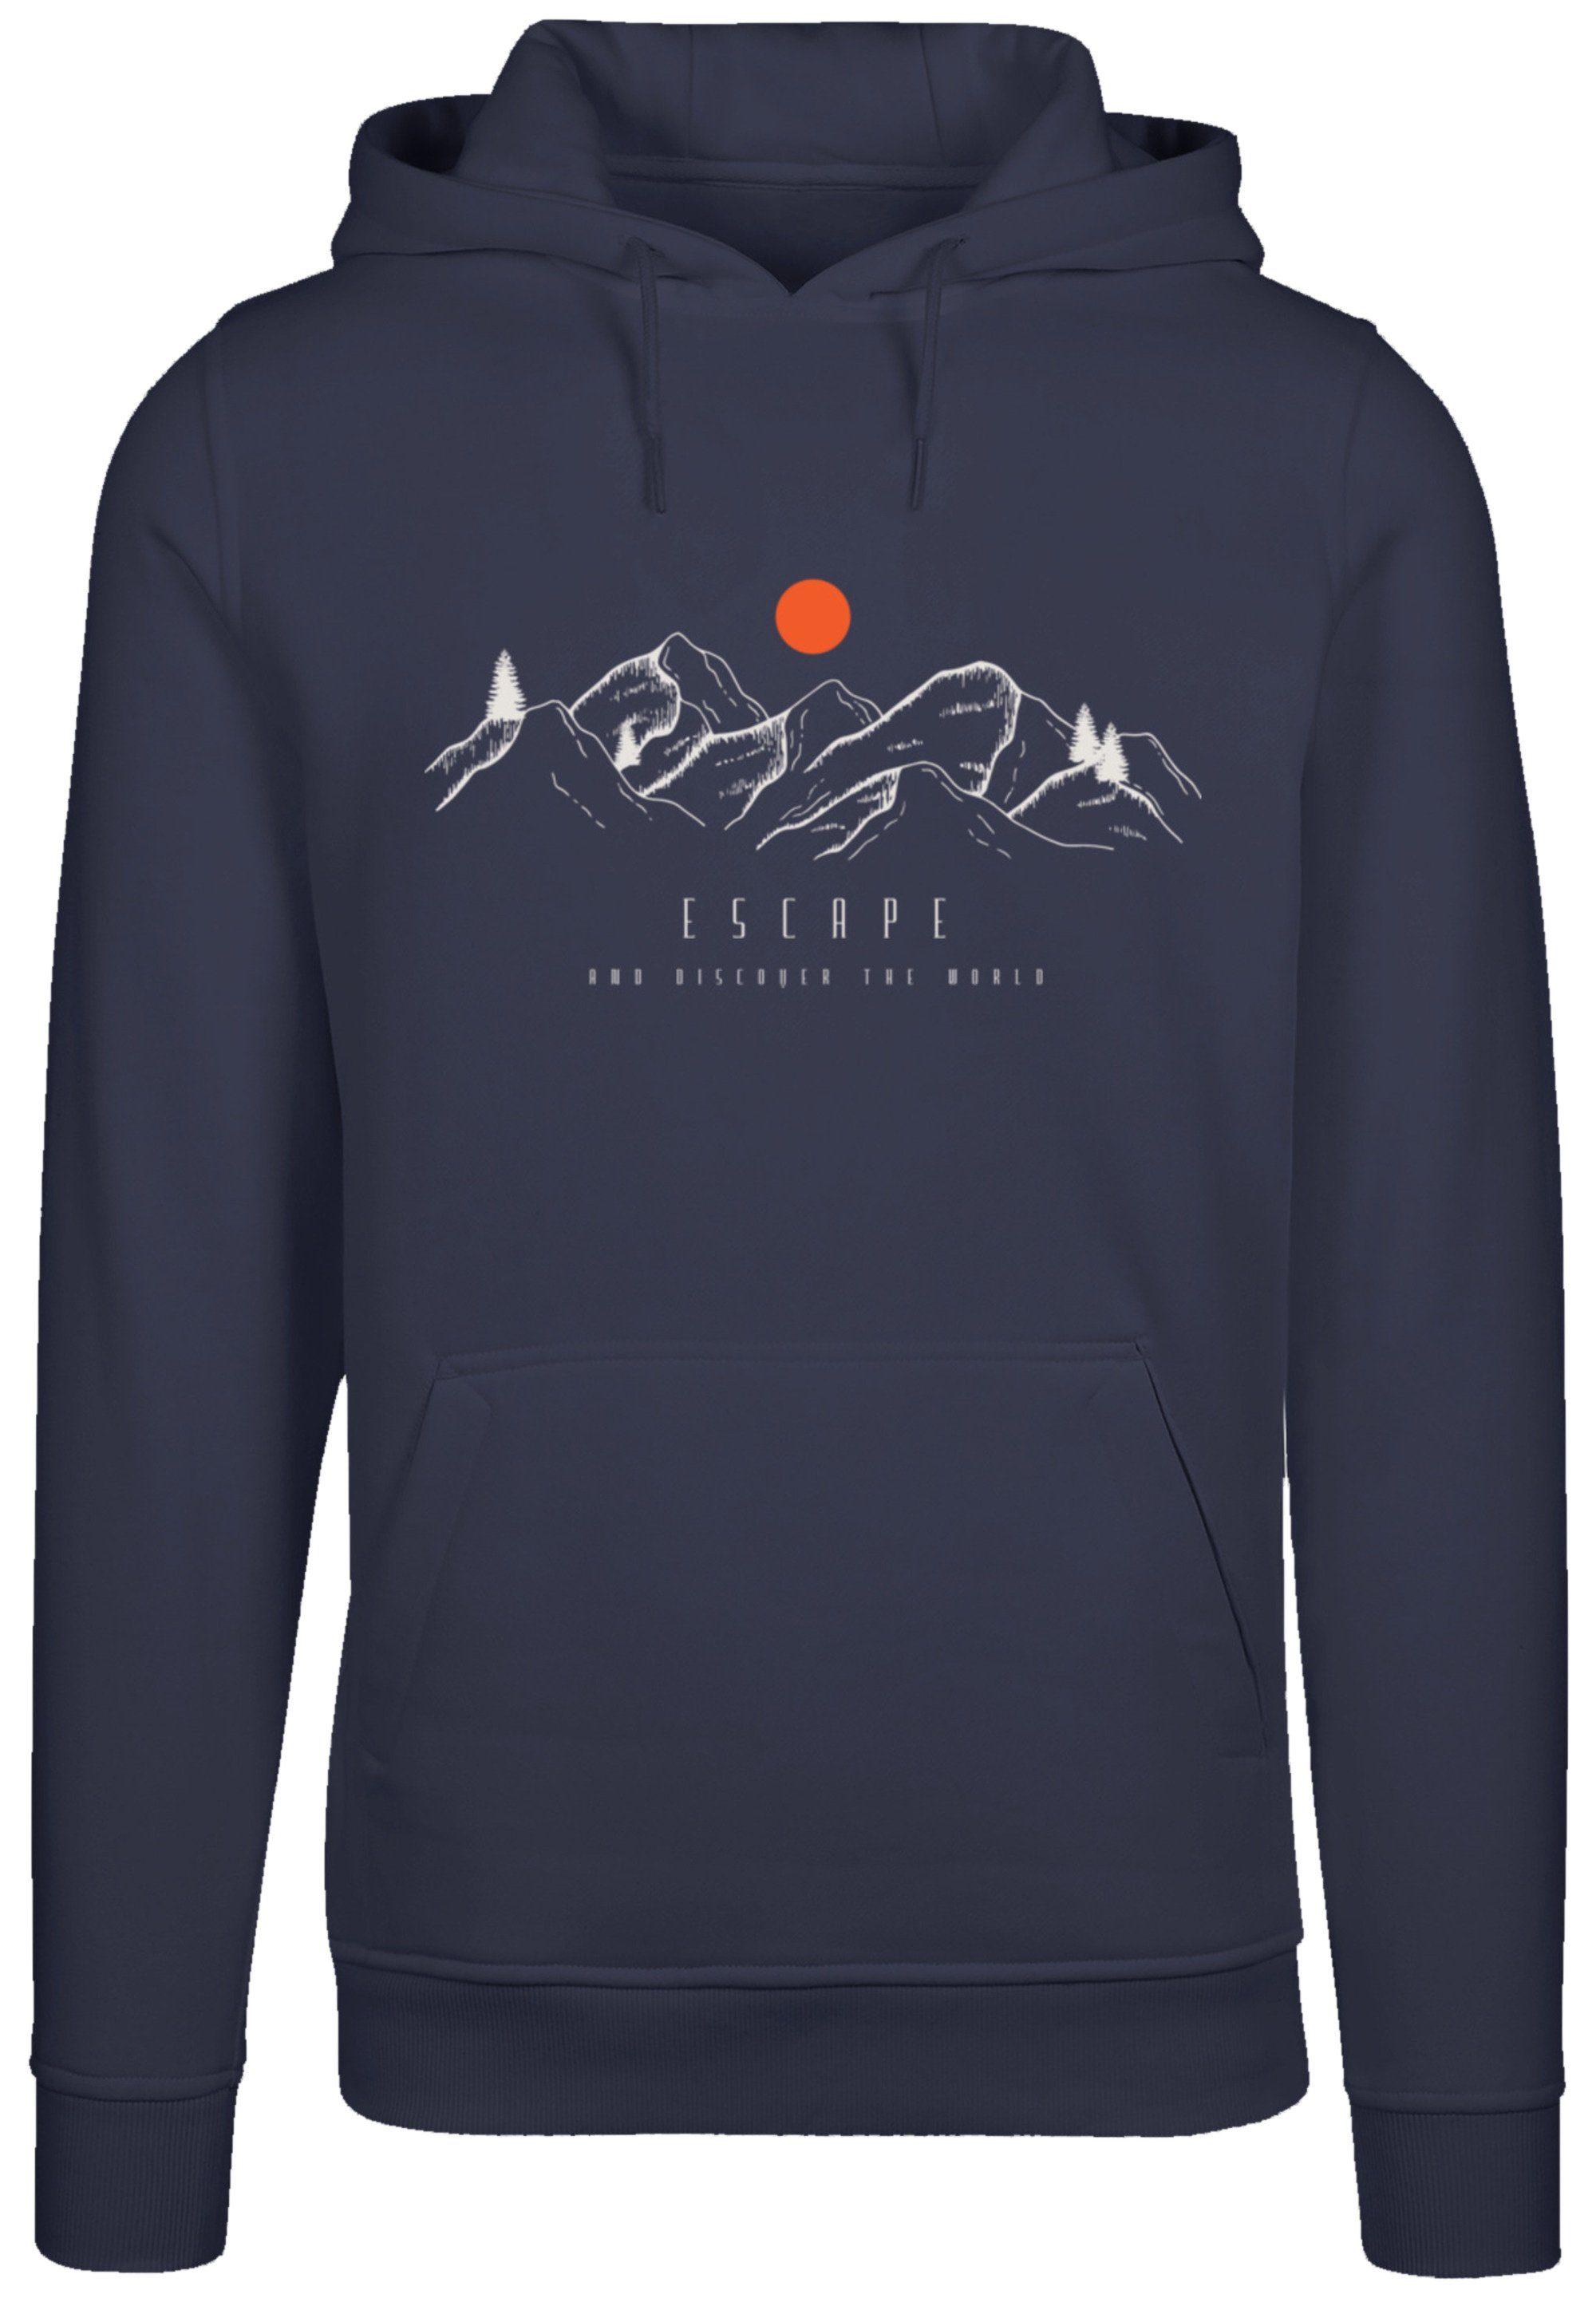 F4NT4STIC Kapuzenpullover Discover the world Hoodie, Warm, Bequem navy